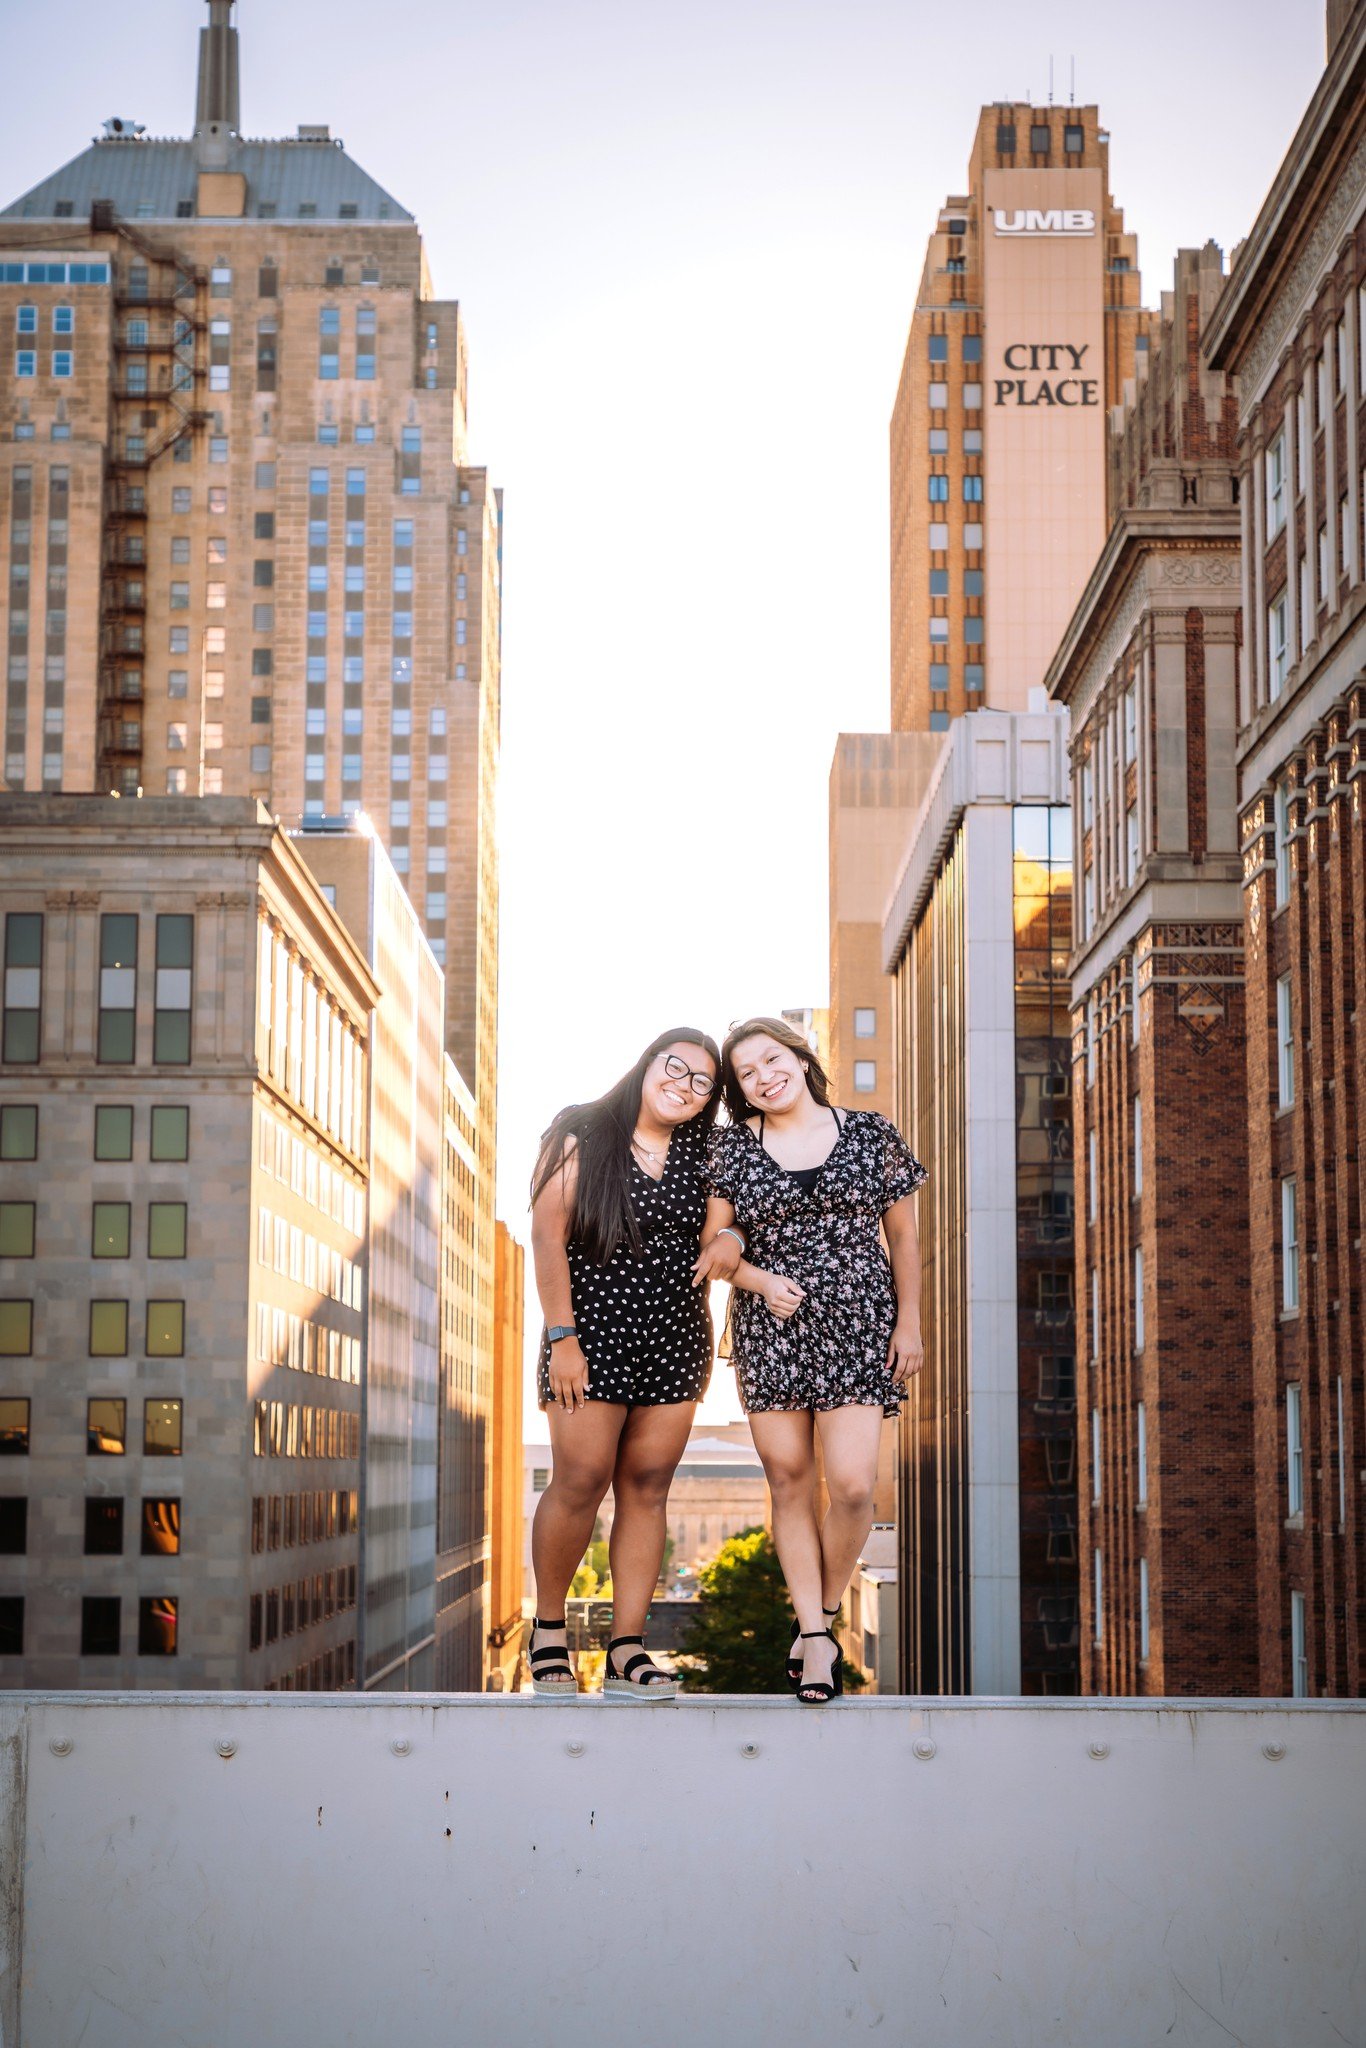 &quot;The future belongs to those who believe in the beauty of their dreams.&quot; - Eleanor Roosevelt
Certainly, here are 30 hashtags without specific town names:
#SeniorPhotographer
#SeniorPortraits
#SeniorSession
#GraduationPhotos
#SeniorPictures
